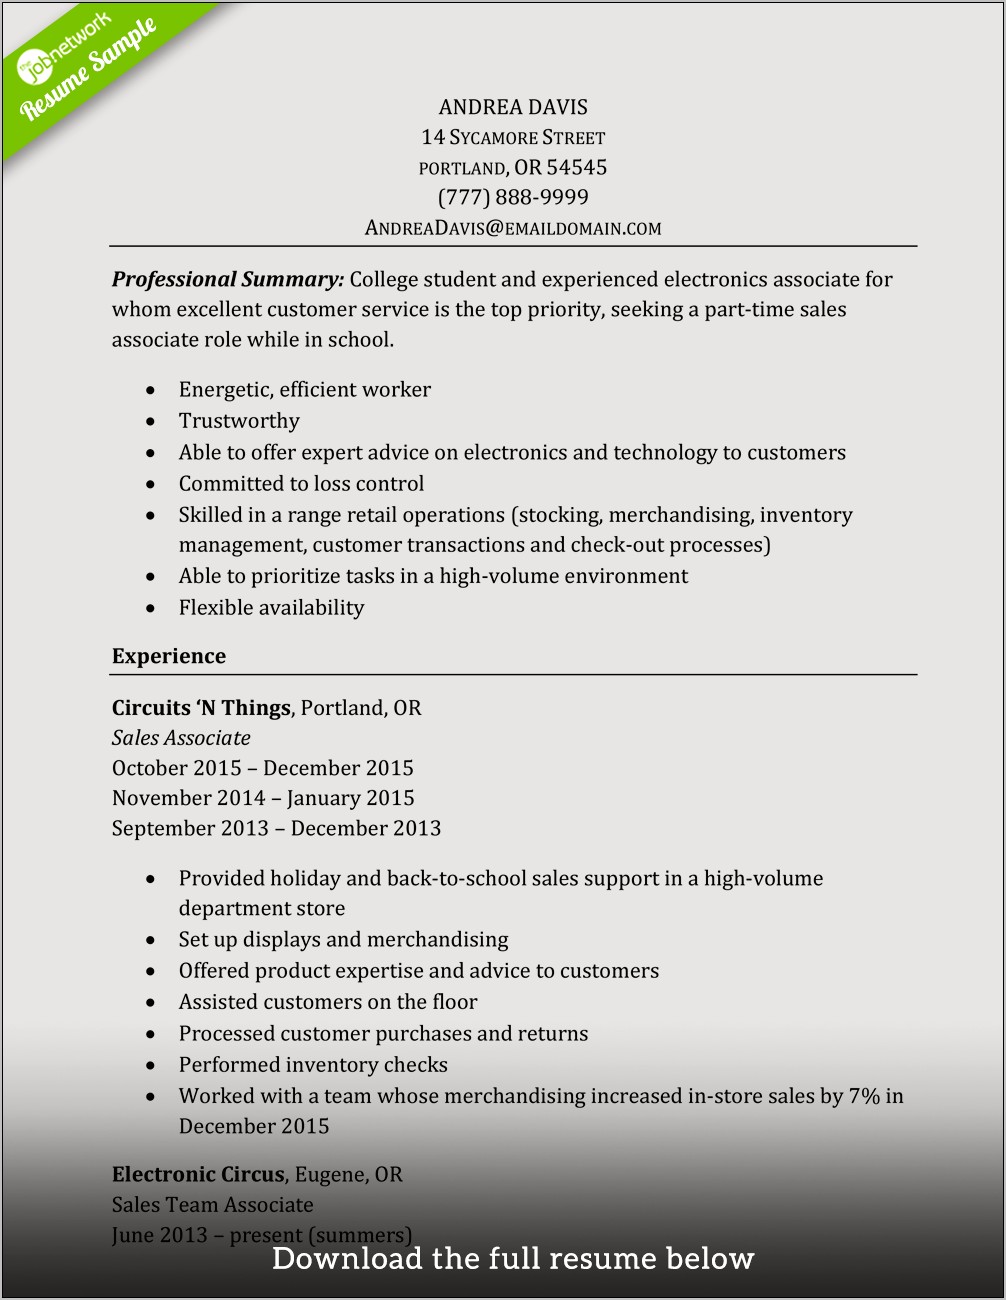 Marketing Resume Sample With No Experience